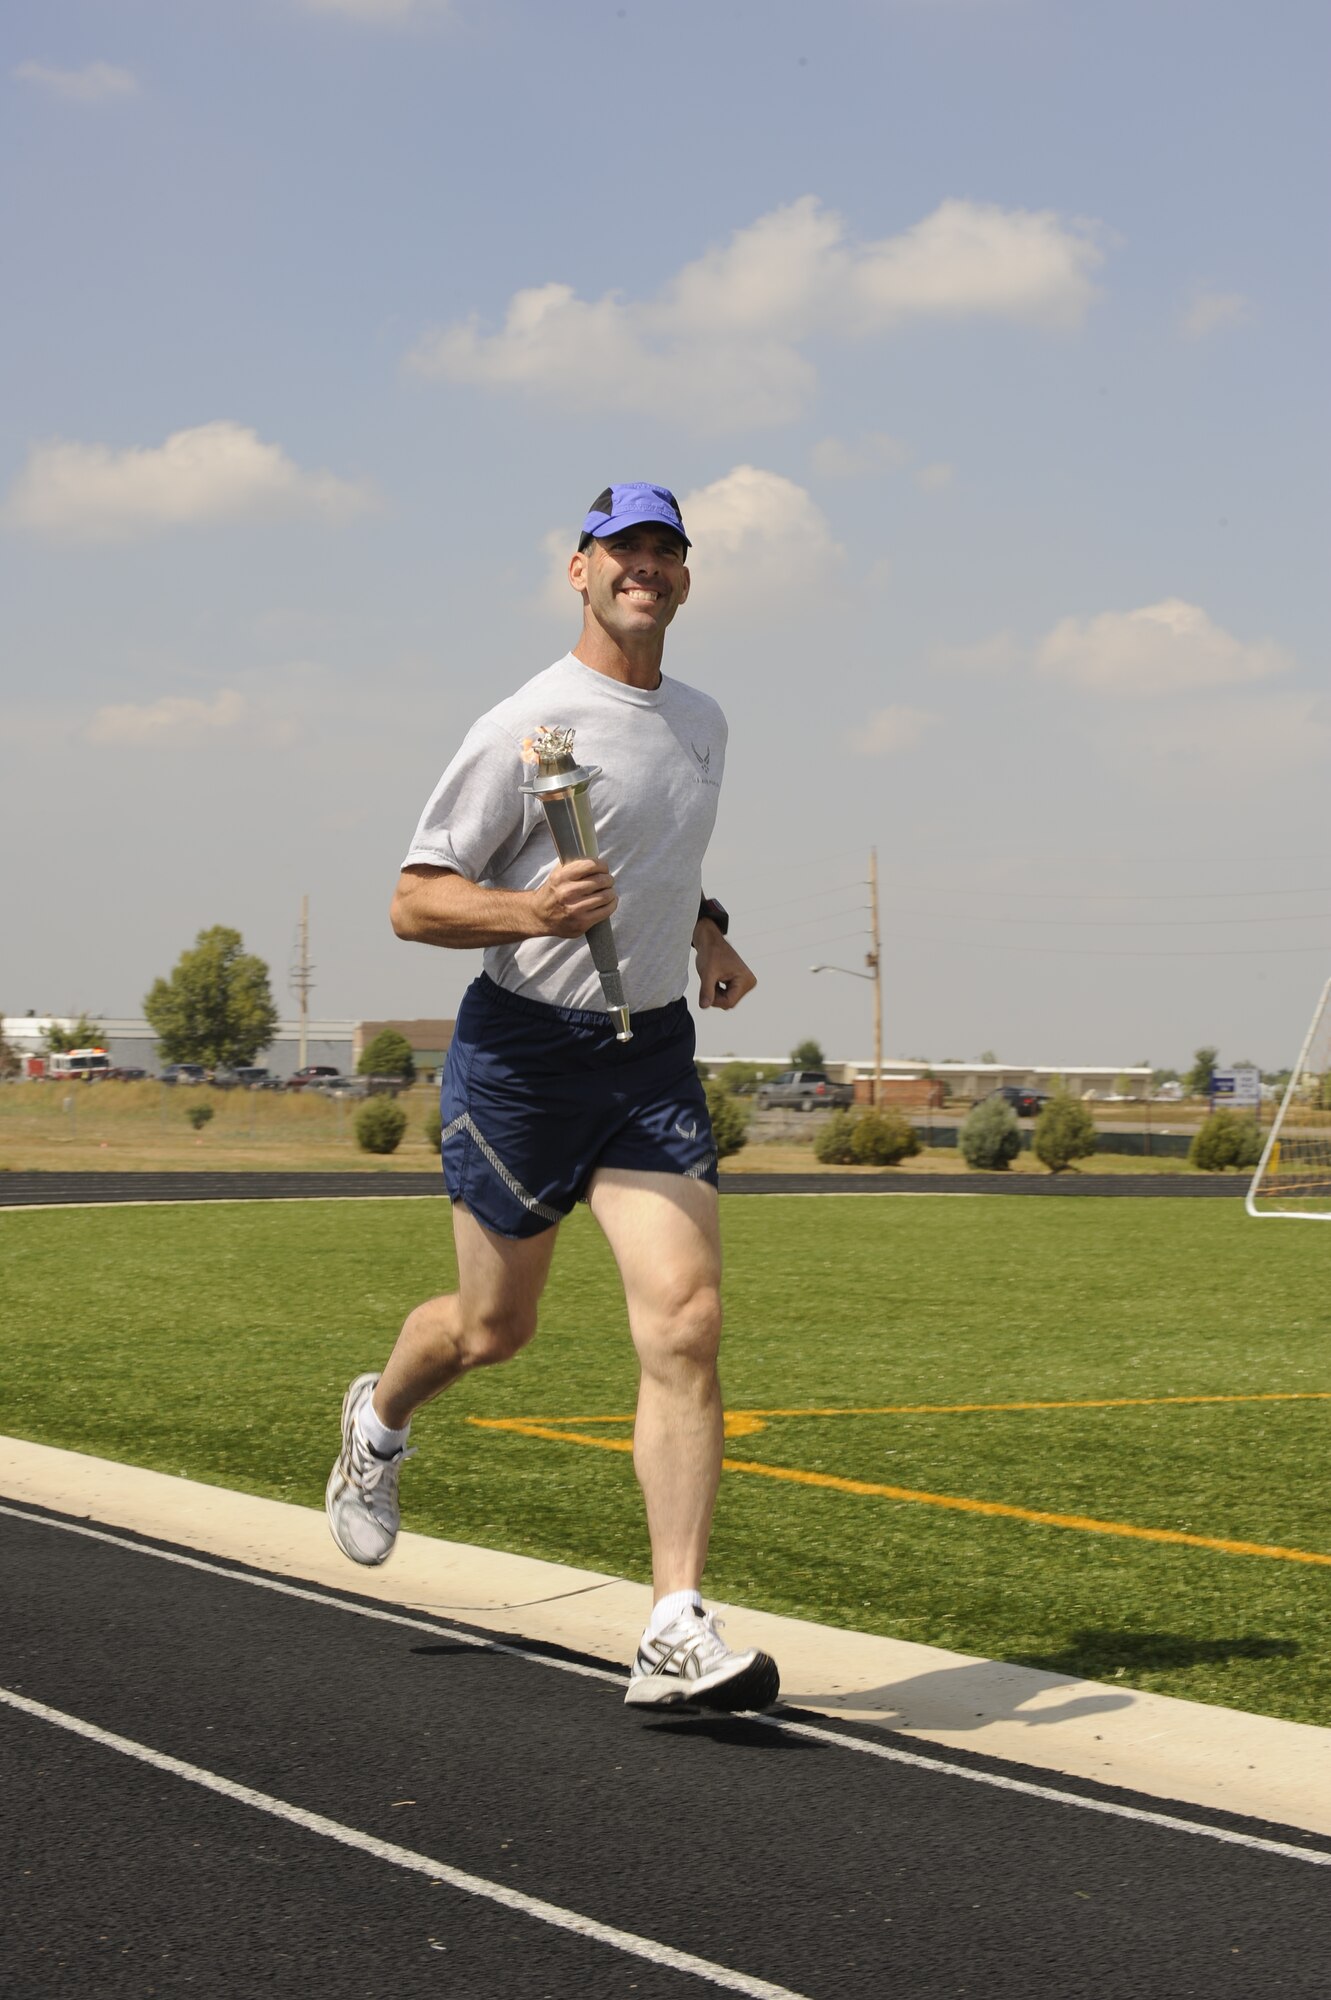 Chief Master Sgt. Todd Kennedy, 460th Space Communications Squadron, kicks off the torch run for Team Buckley during the POW/MIA torch run held at the base track, Sept. 18. (U.S. Air Force photo by Senior Airman Steven Czyz)